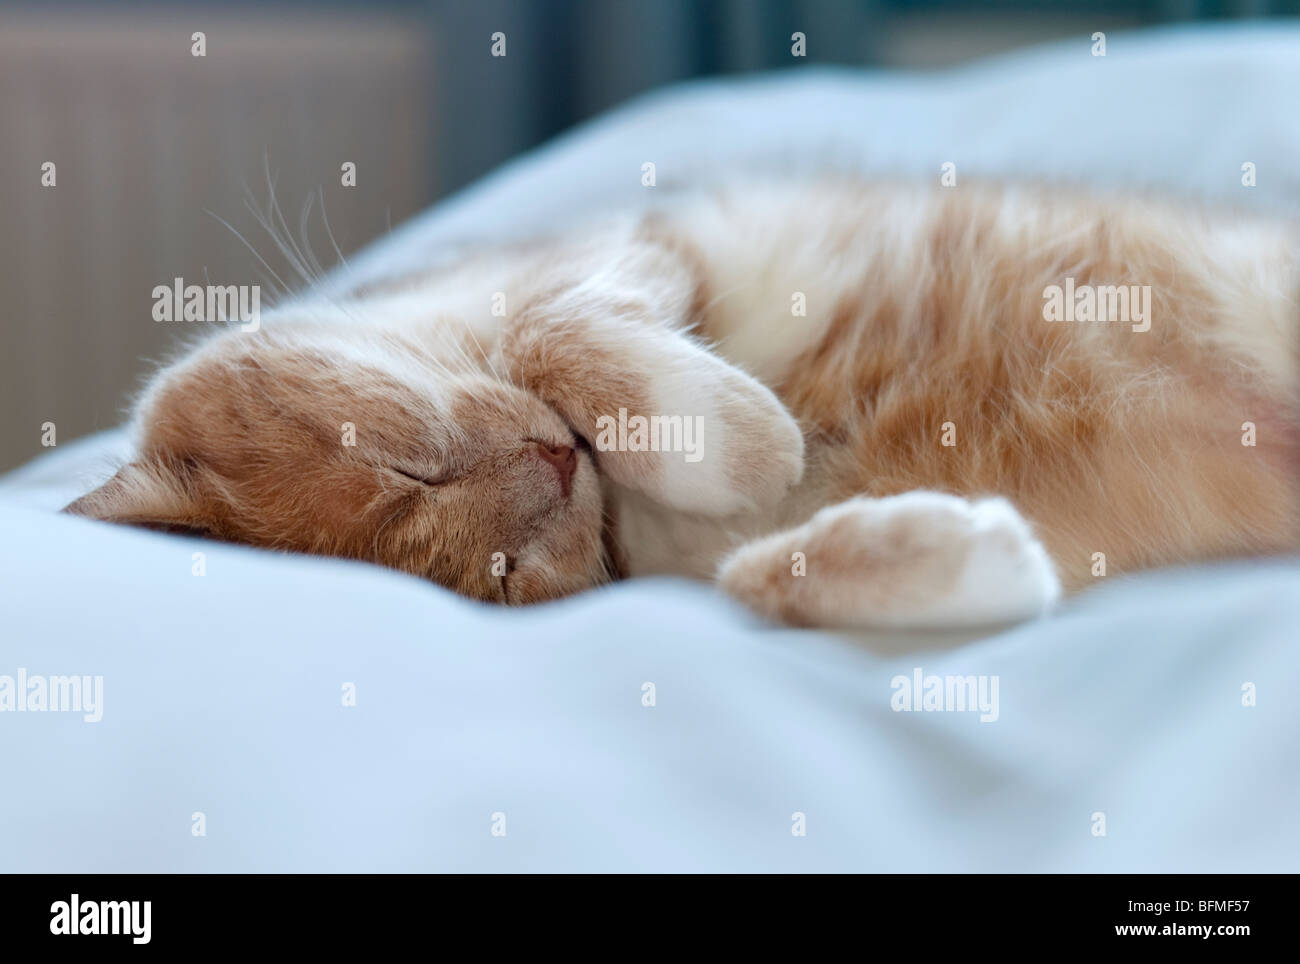 A cat sleeping on top of a duvet in a bedroom Stock Photo